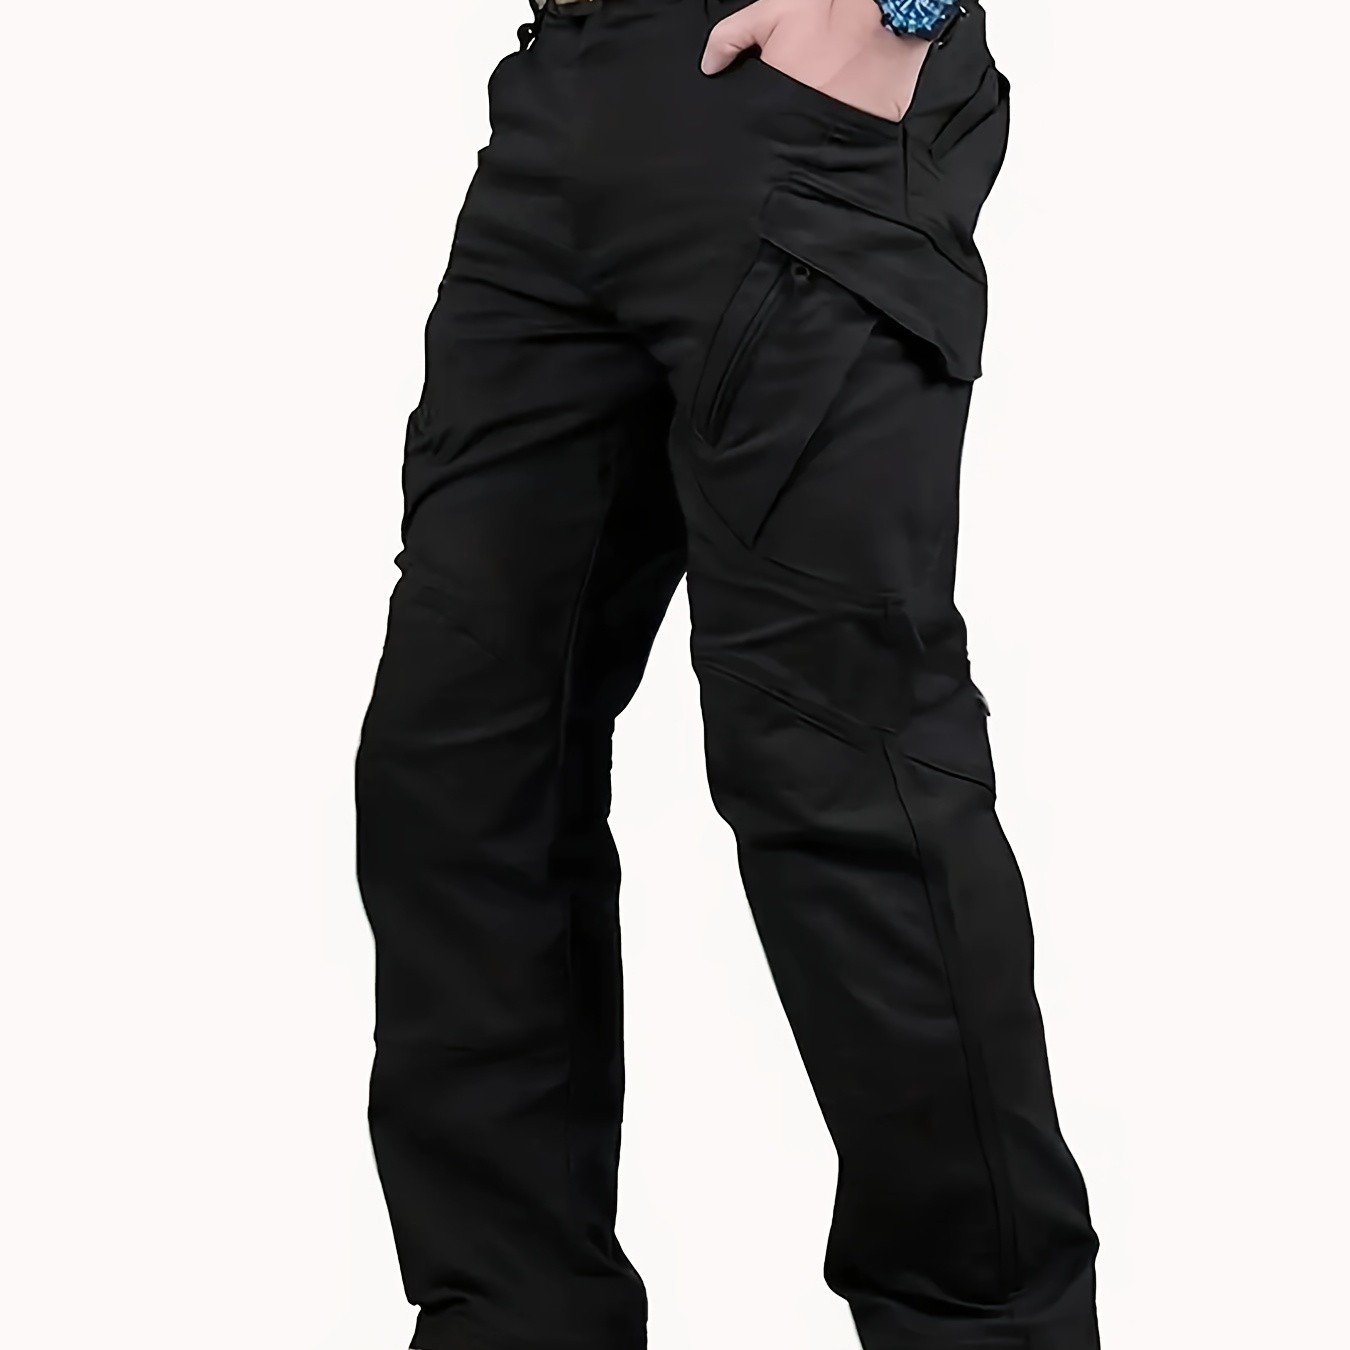 

Multi Pocket Men's Tactical Pants, Loose Casual Outdoor Military Pants, Mens Cargo Pants For Hiking Camping